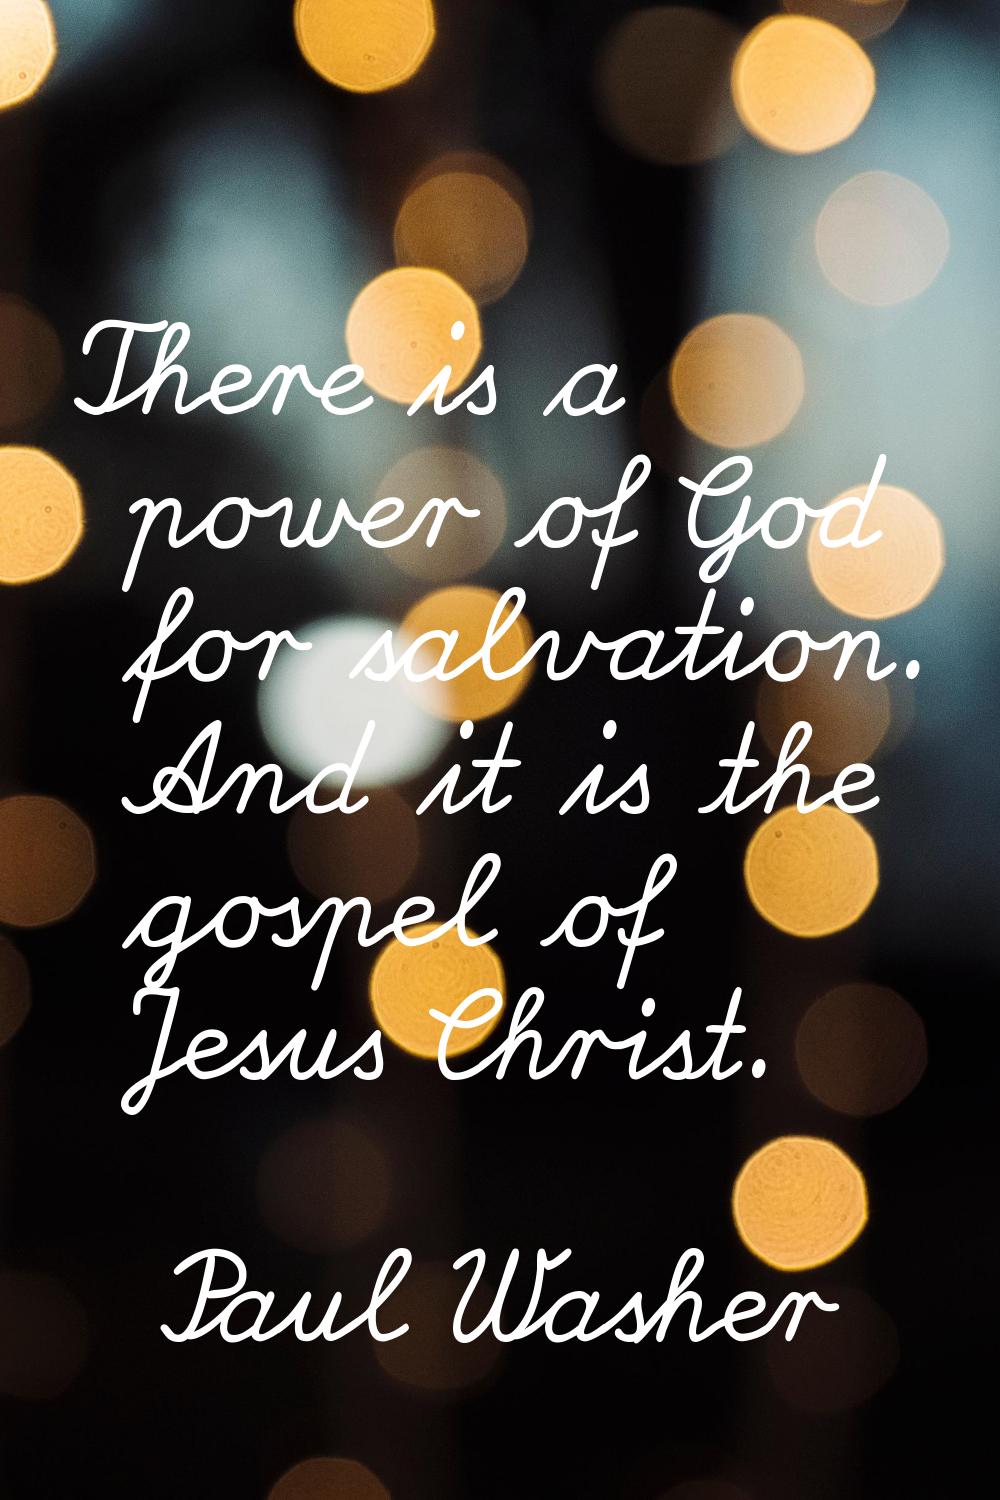 There is a power of God for salvation. And it is the gospel of Jesus Christ.